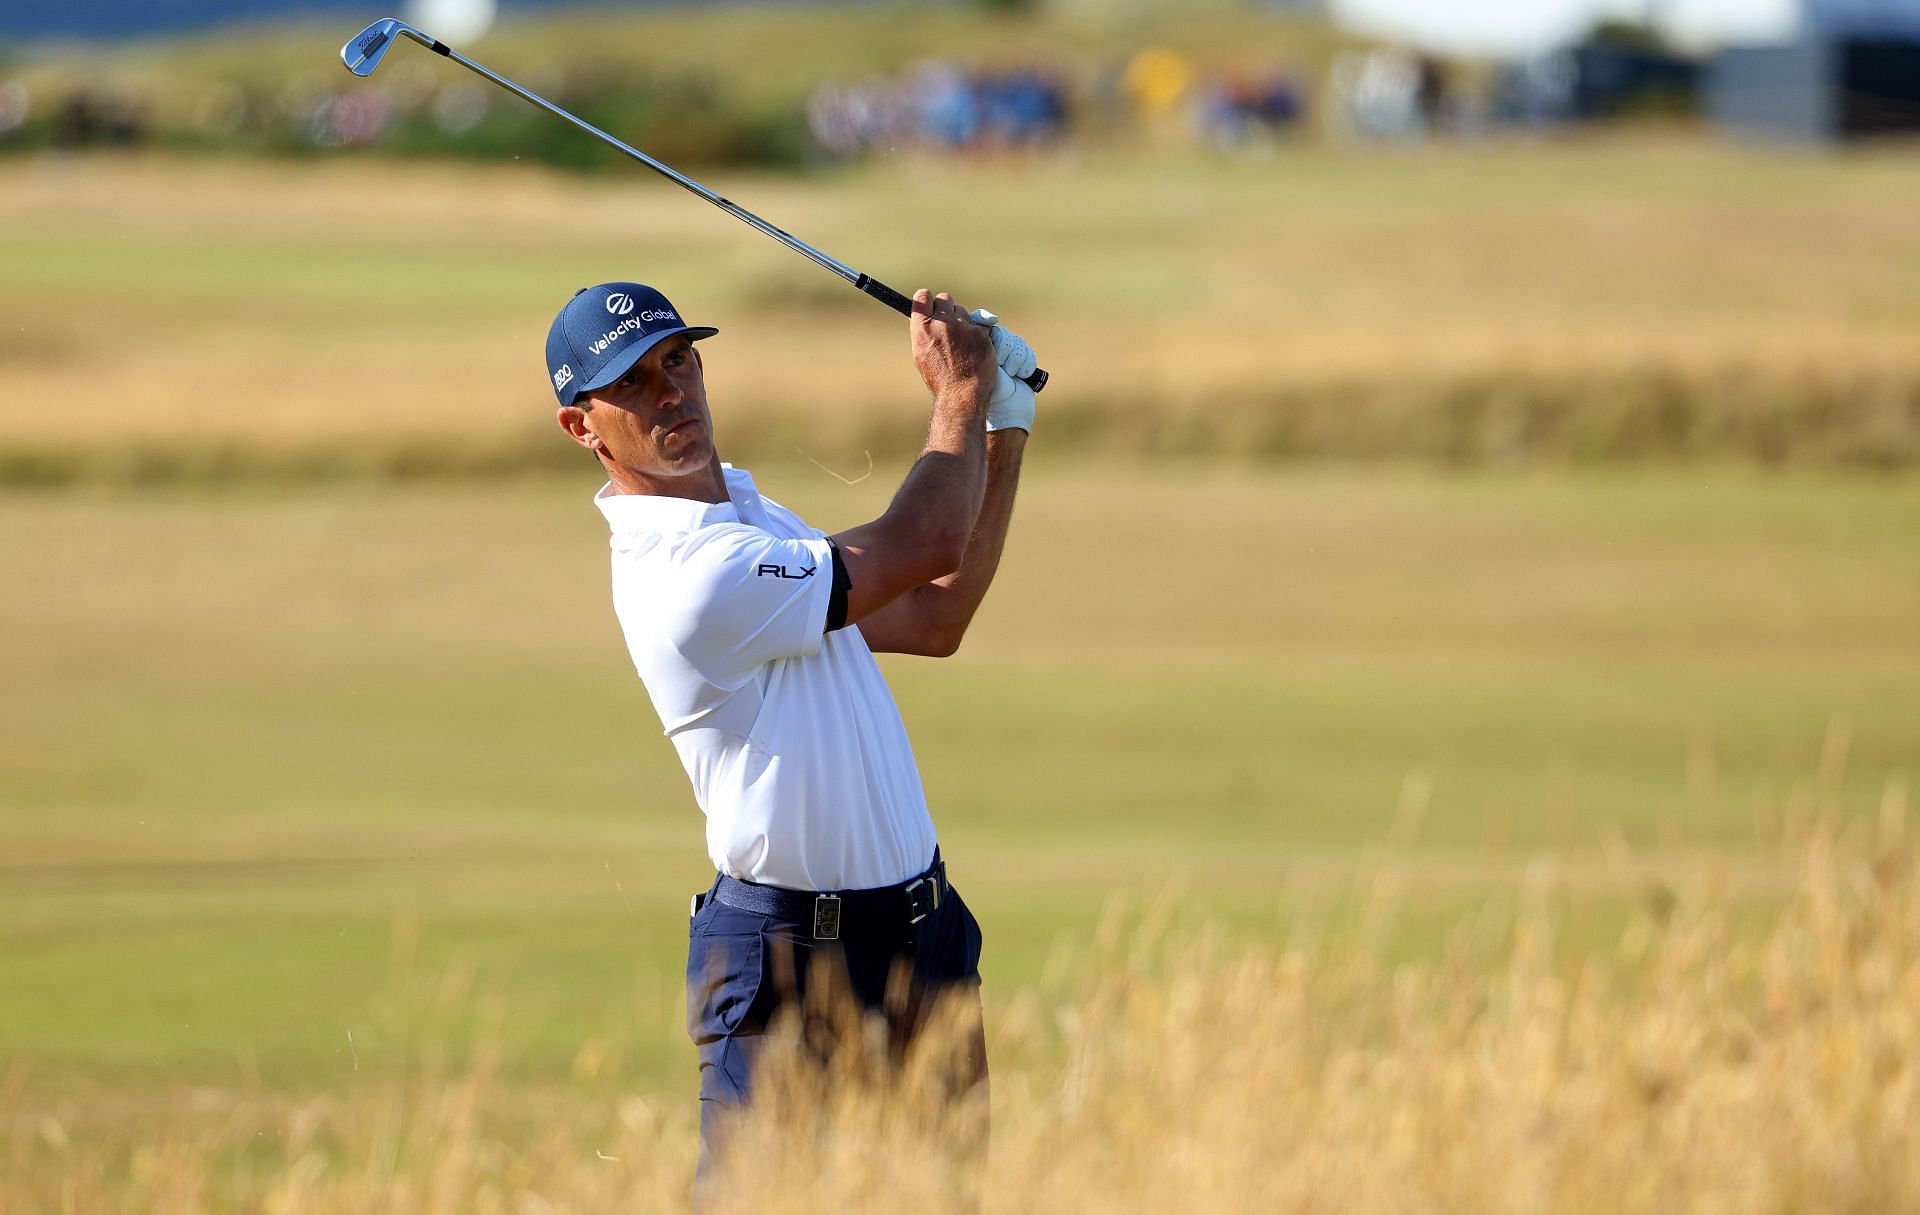 Billy Horschel finished T21 at the 2022 Open Championship